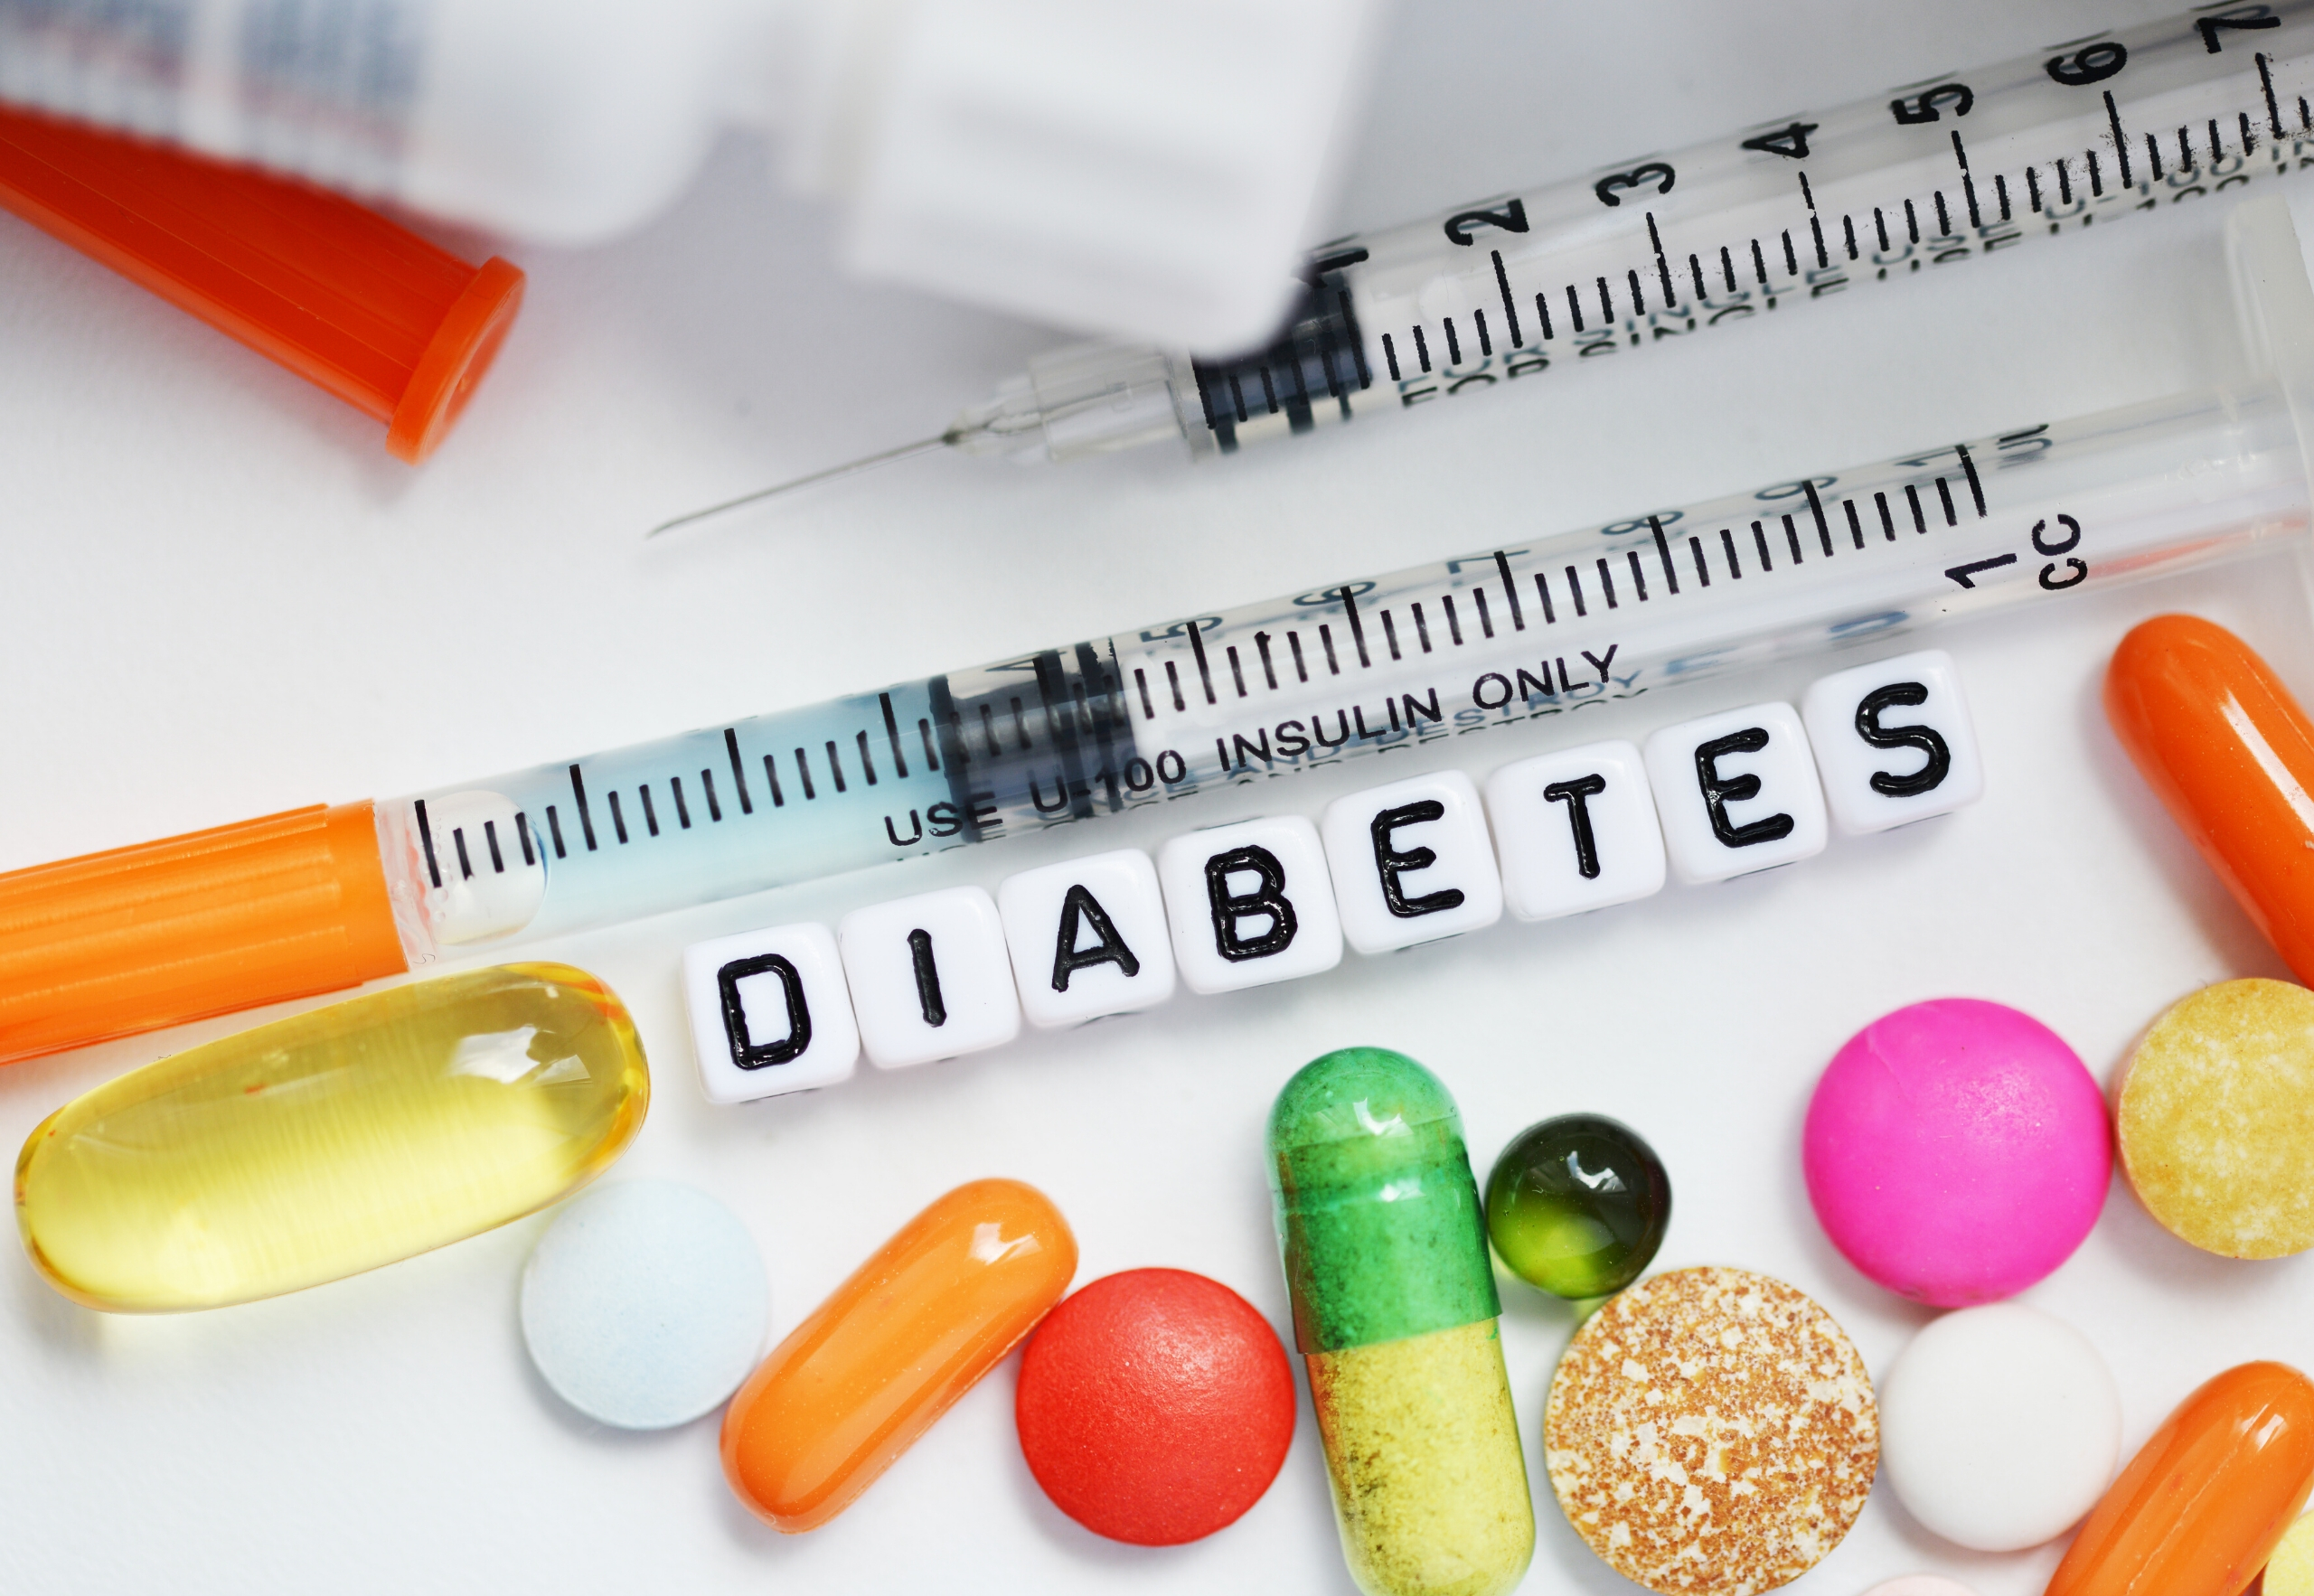 Diabetes symptoms picture showing the word diabetes surrounded by tablets and insulin syringes